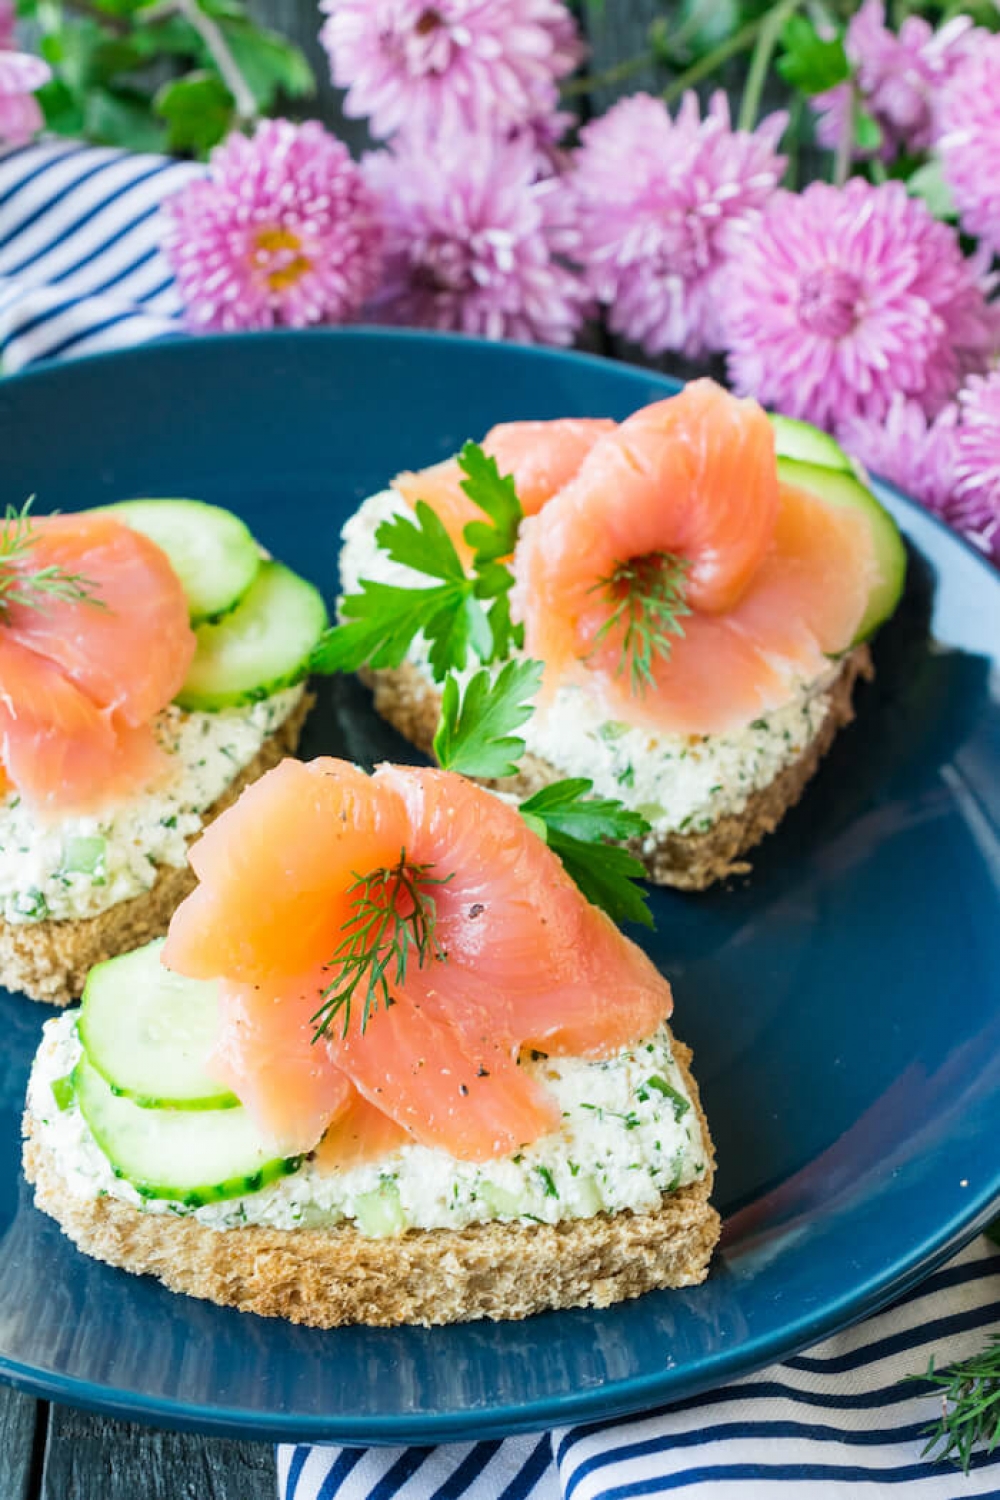 Salmon and Cottage Cheese Sandwiches